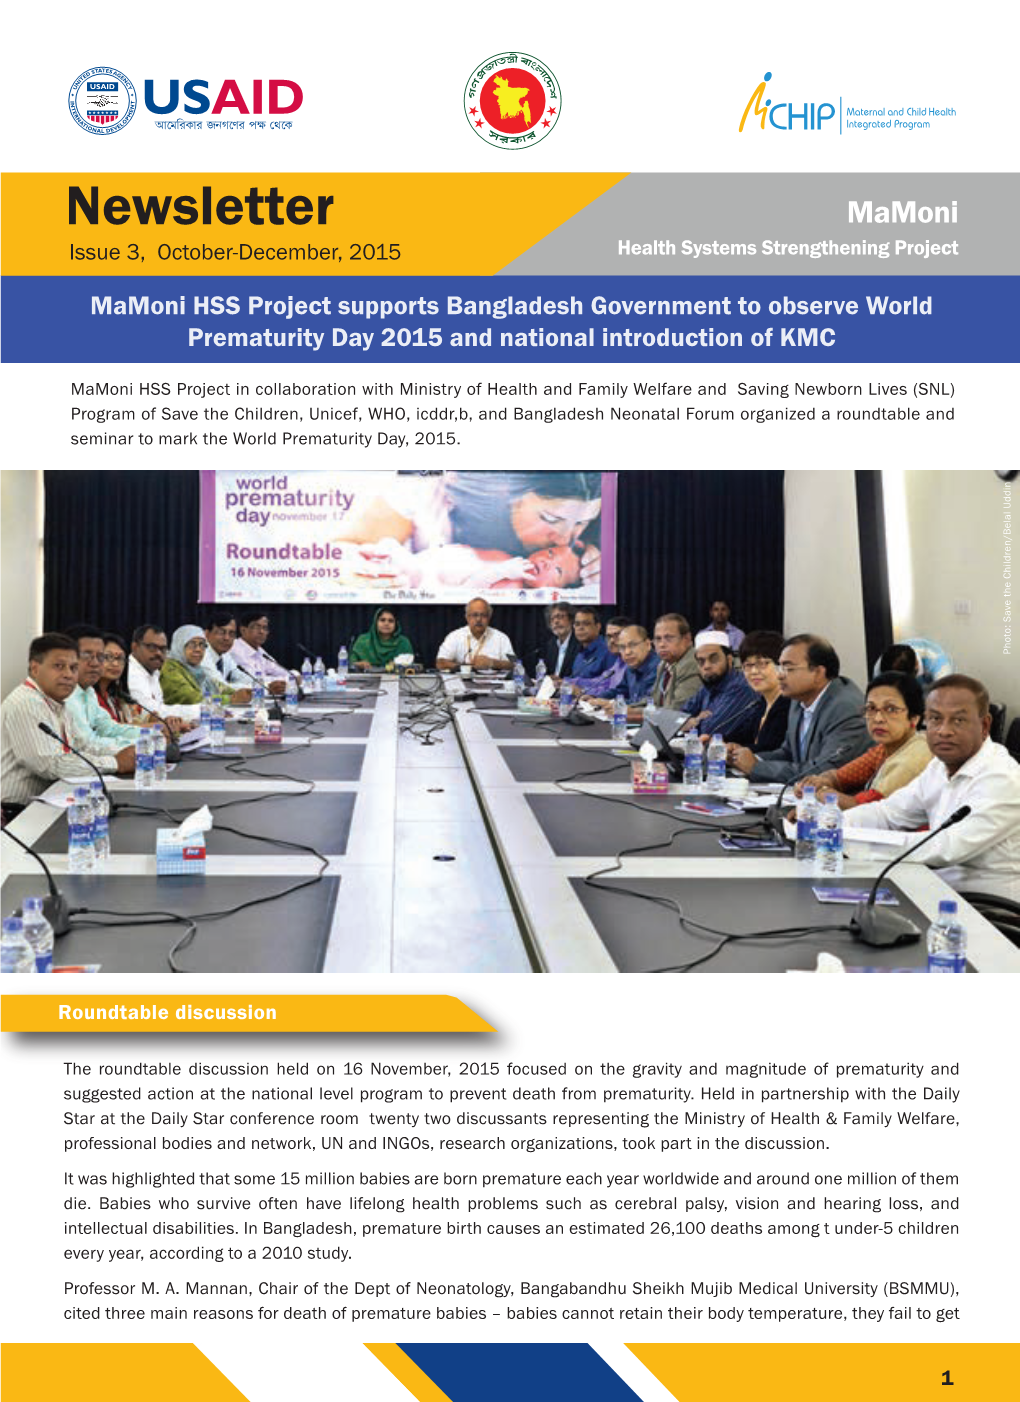 Mamoni Health Systems Strengthening Project-Newsletter